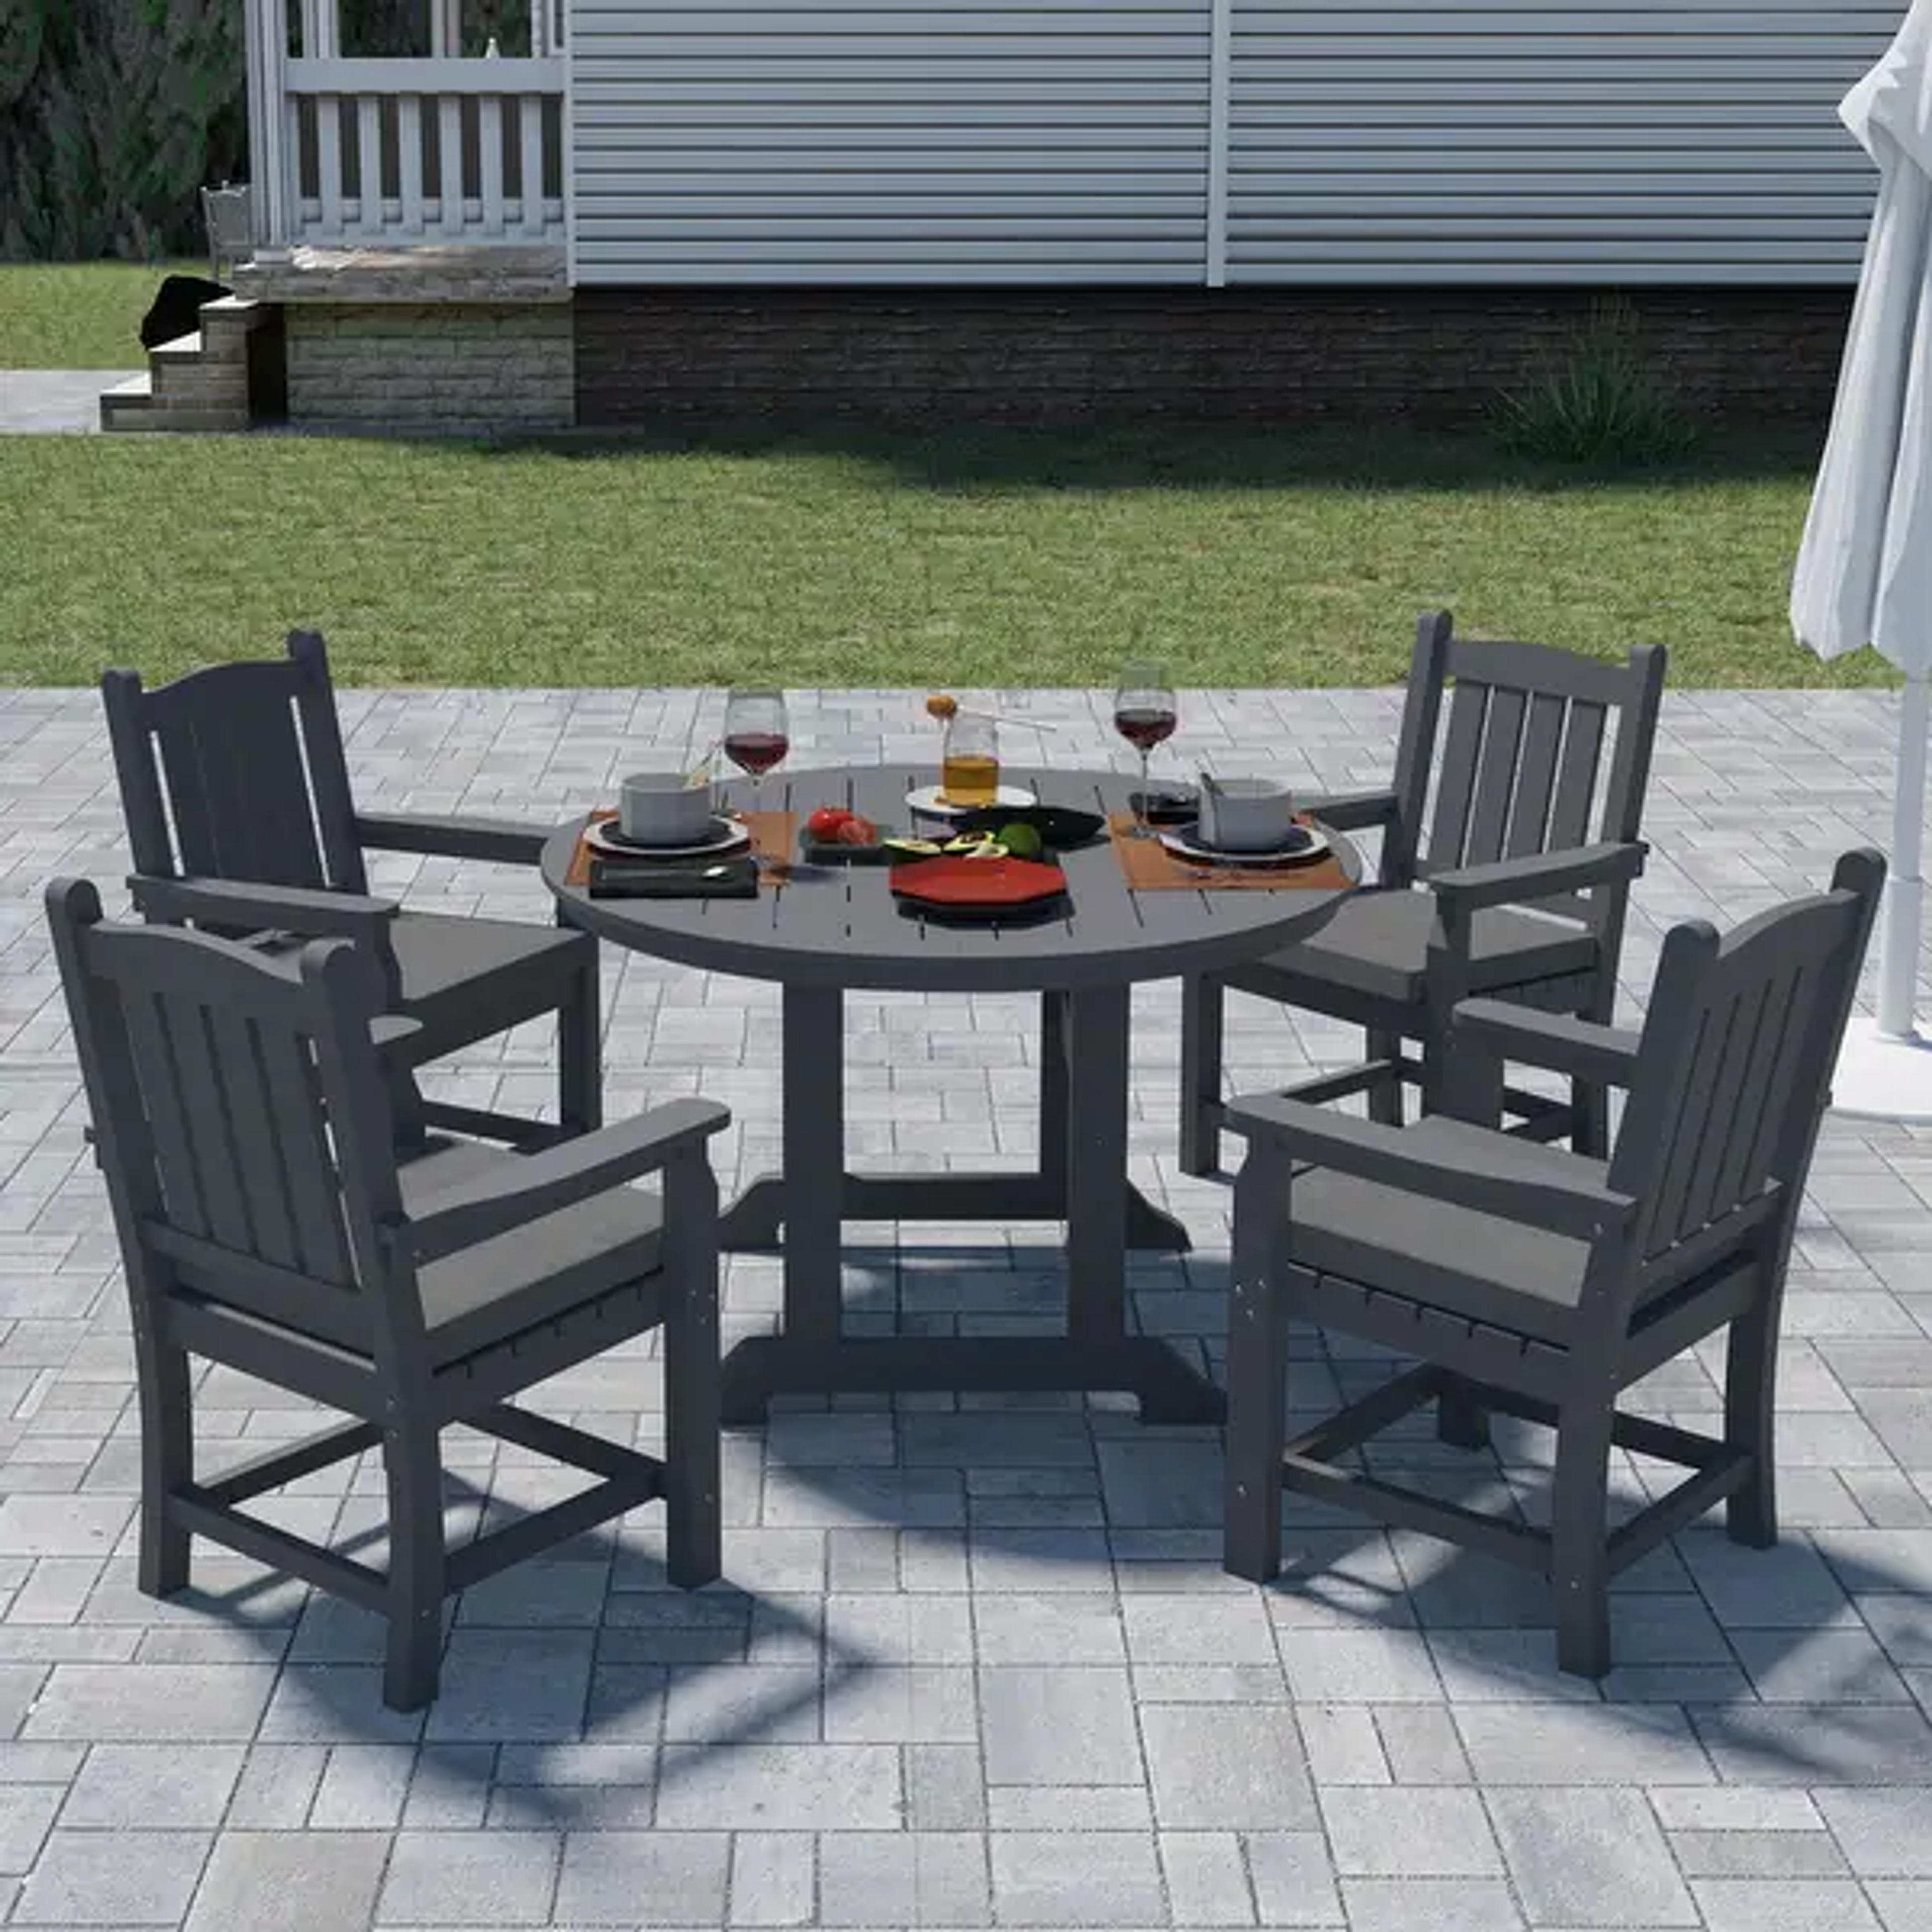 Outdoor Patio HDPE Round Dining Table Grey - N/A - On Sale - Bed Bath & Beyond - 37149784